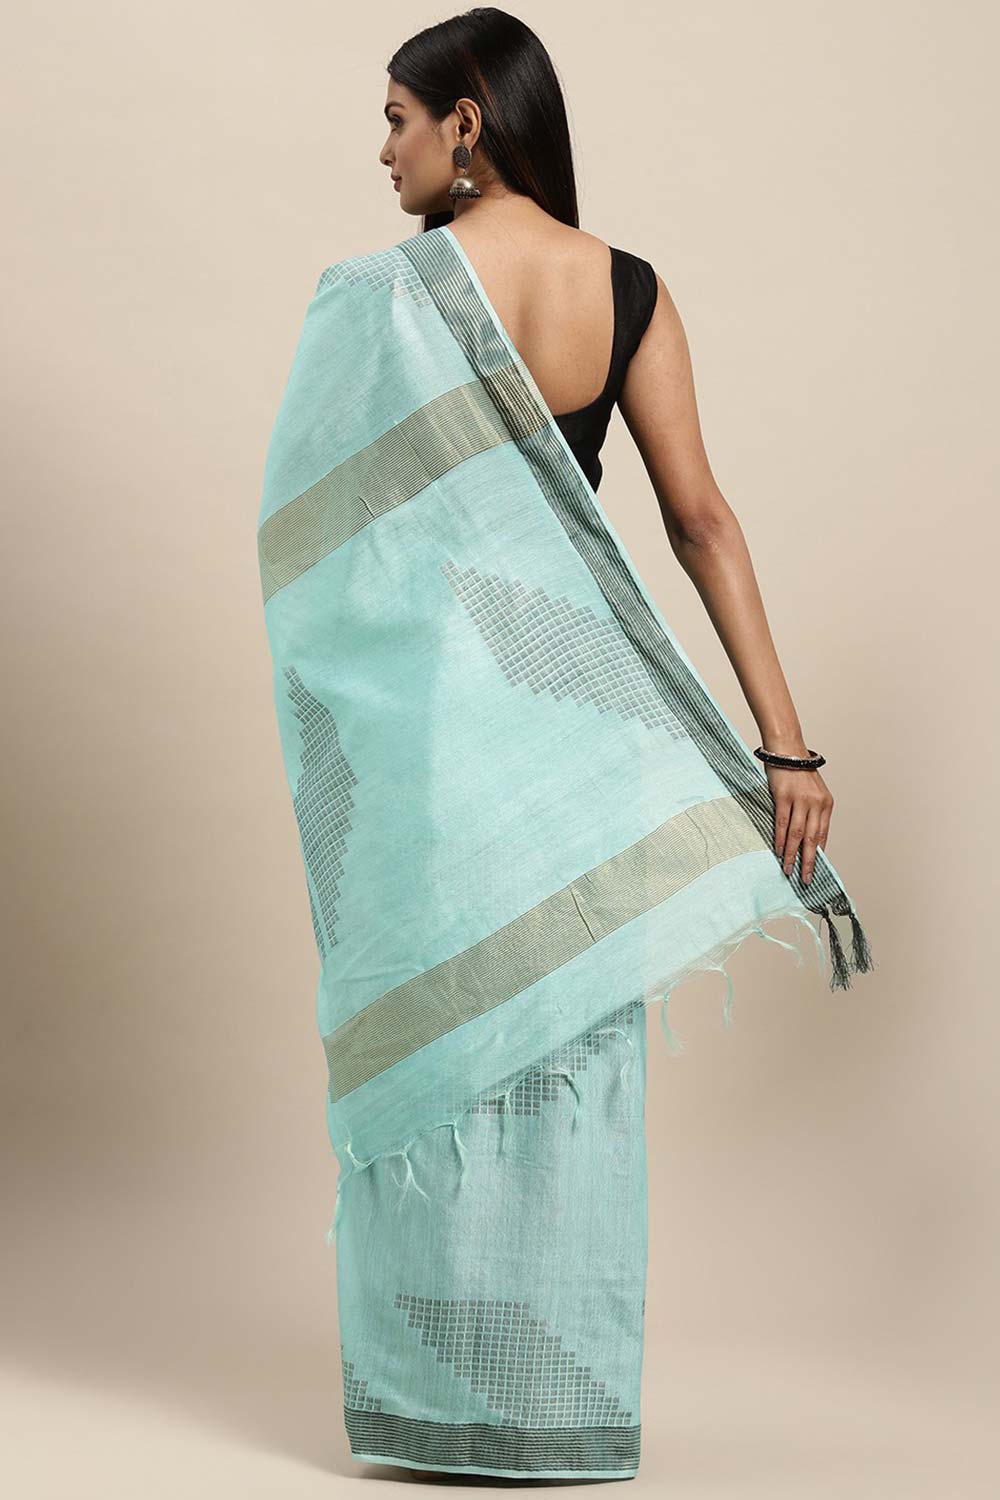 Betsy Blue Silk Blend Woven One Minute Saree